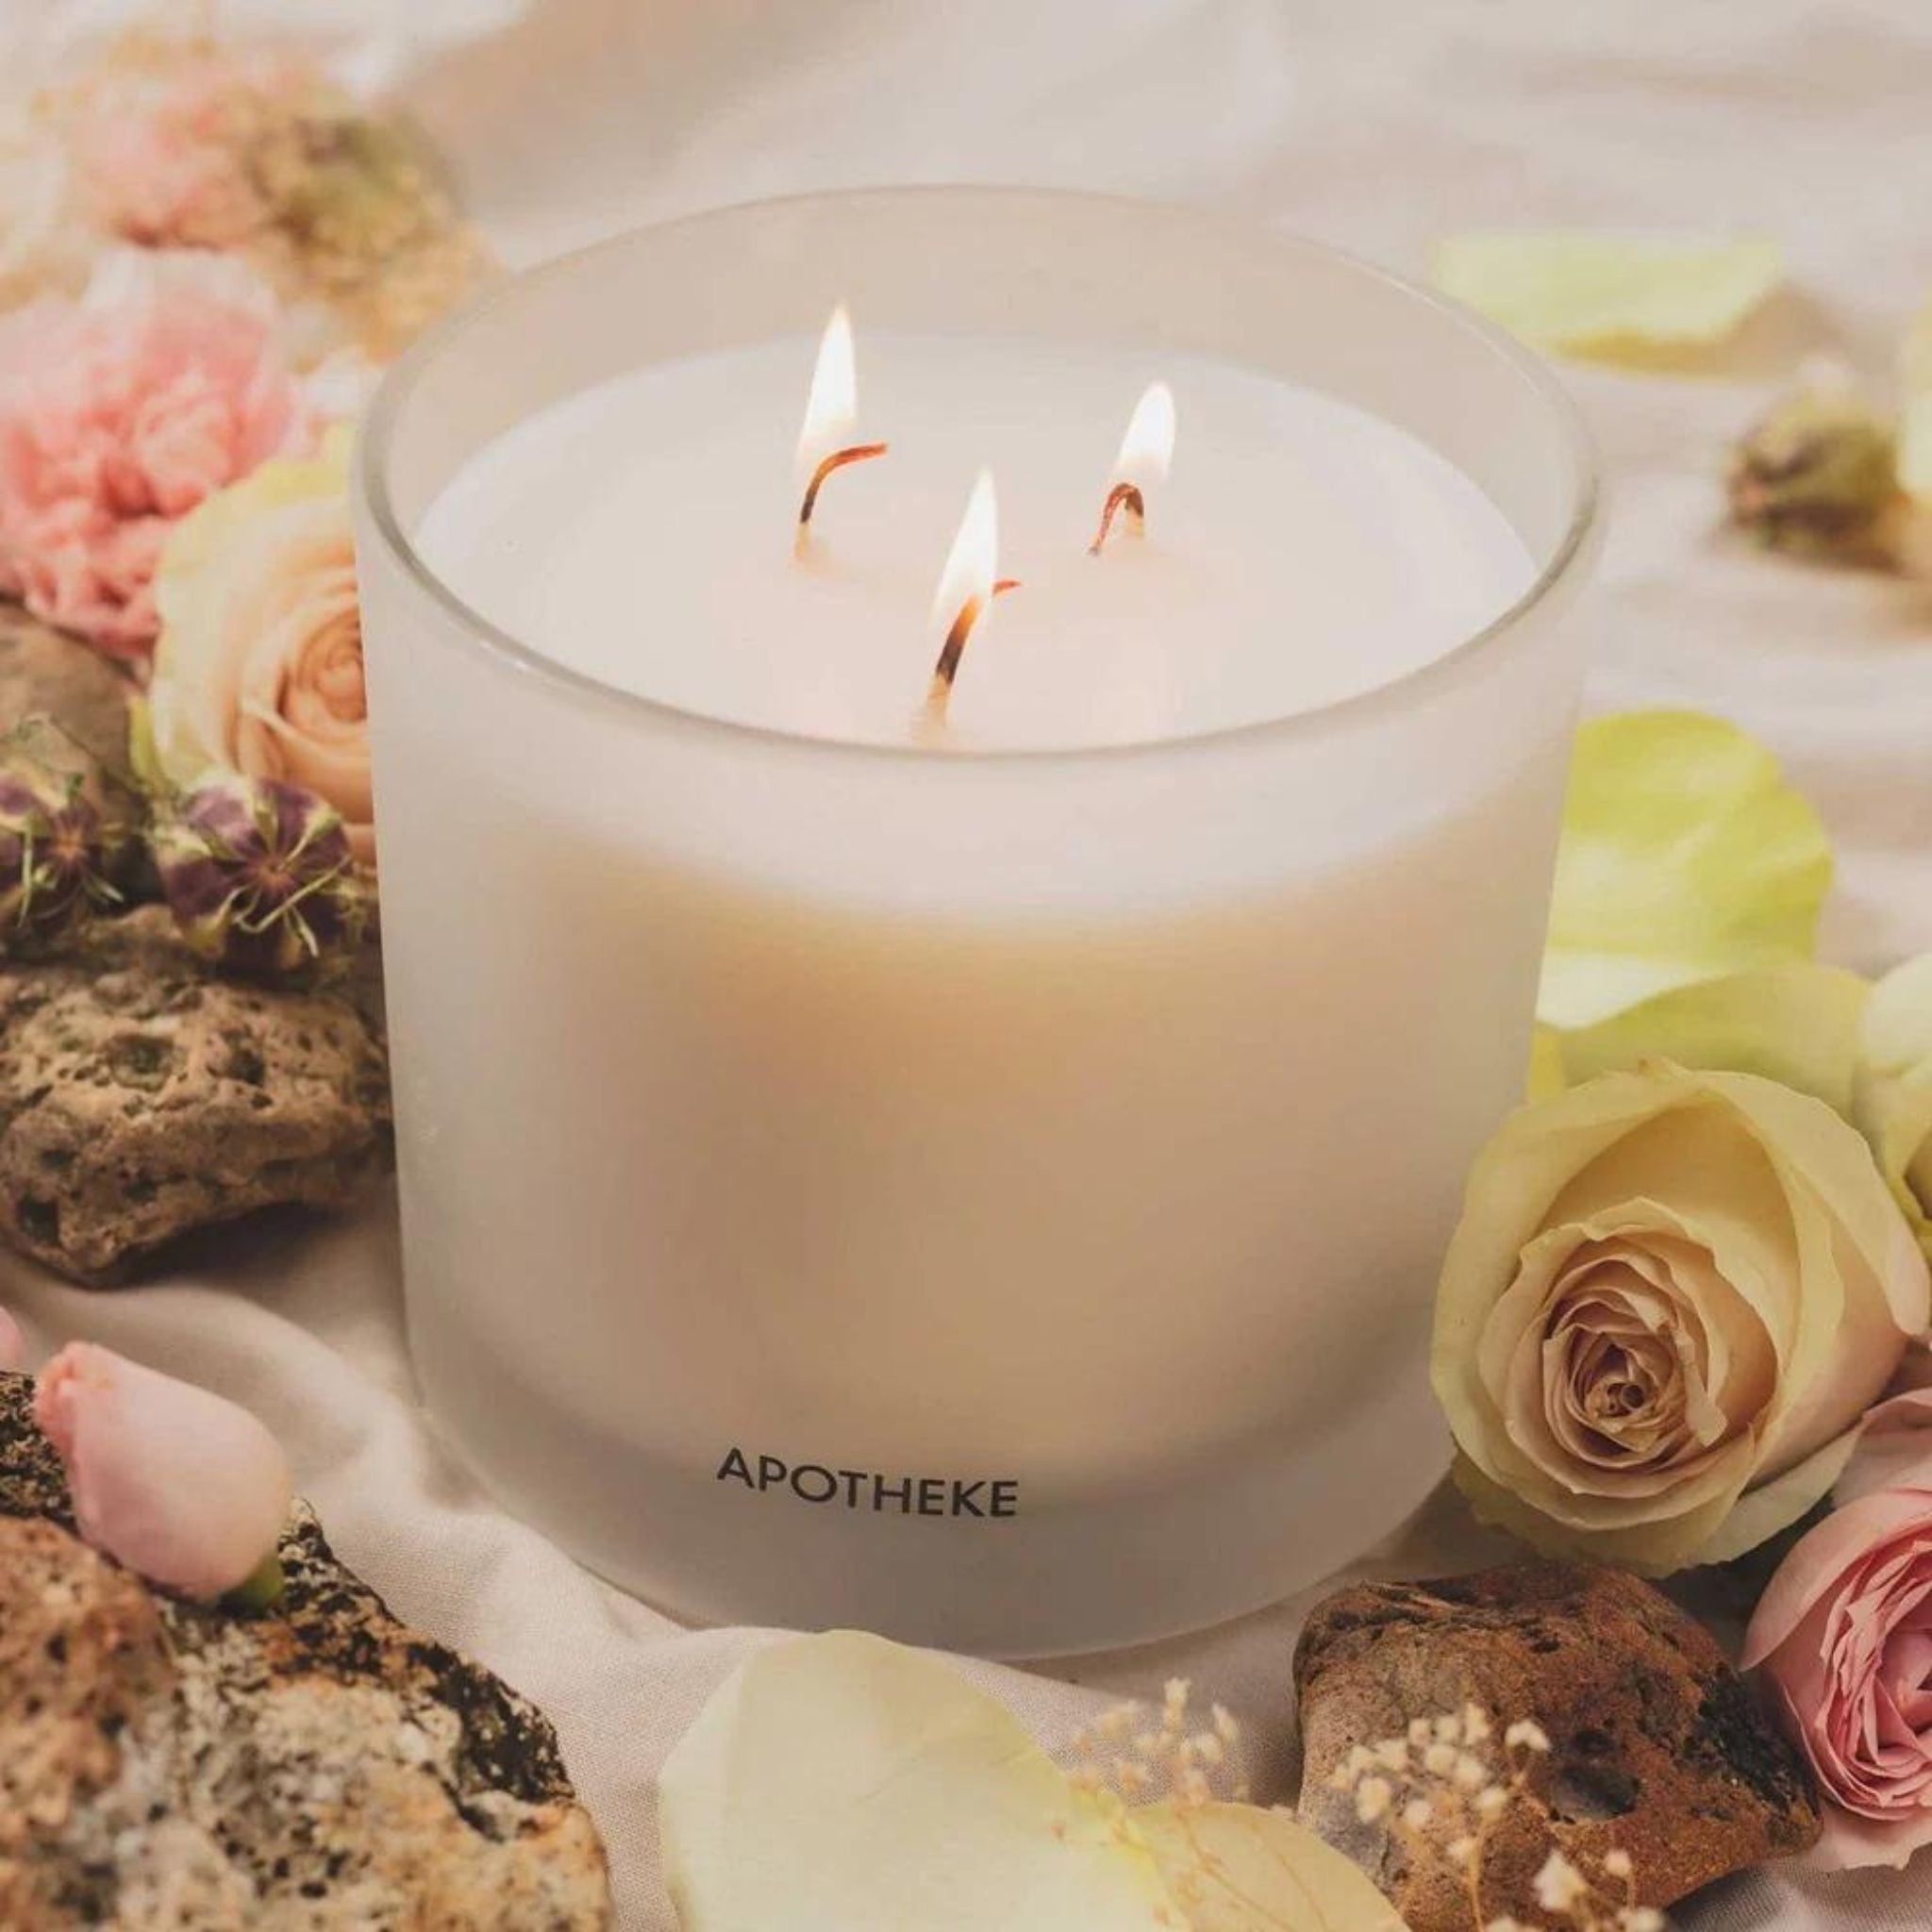 SIMPLY ELEVATED X APOTHEKE Our Santal Rock Rose 3-Wick Candle has a surprising scent that is nothing like your grandmother’s roses. Notes of rich sandalwood combined with earthy, herbaceous rock rose blend together to create a dynamic, universal fragrance. 